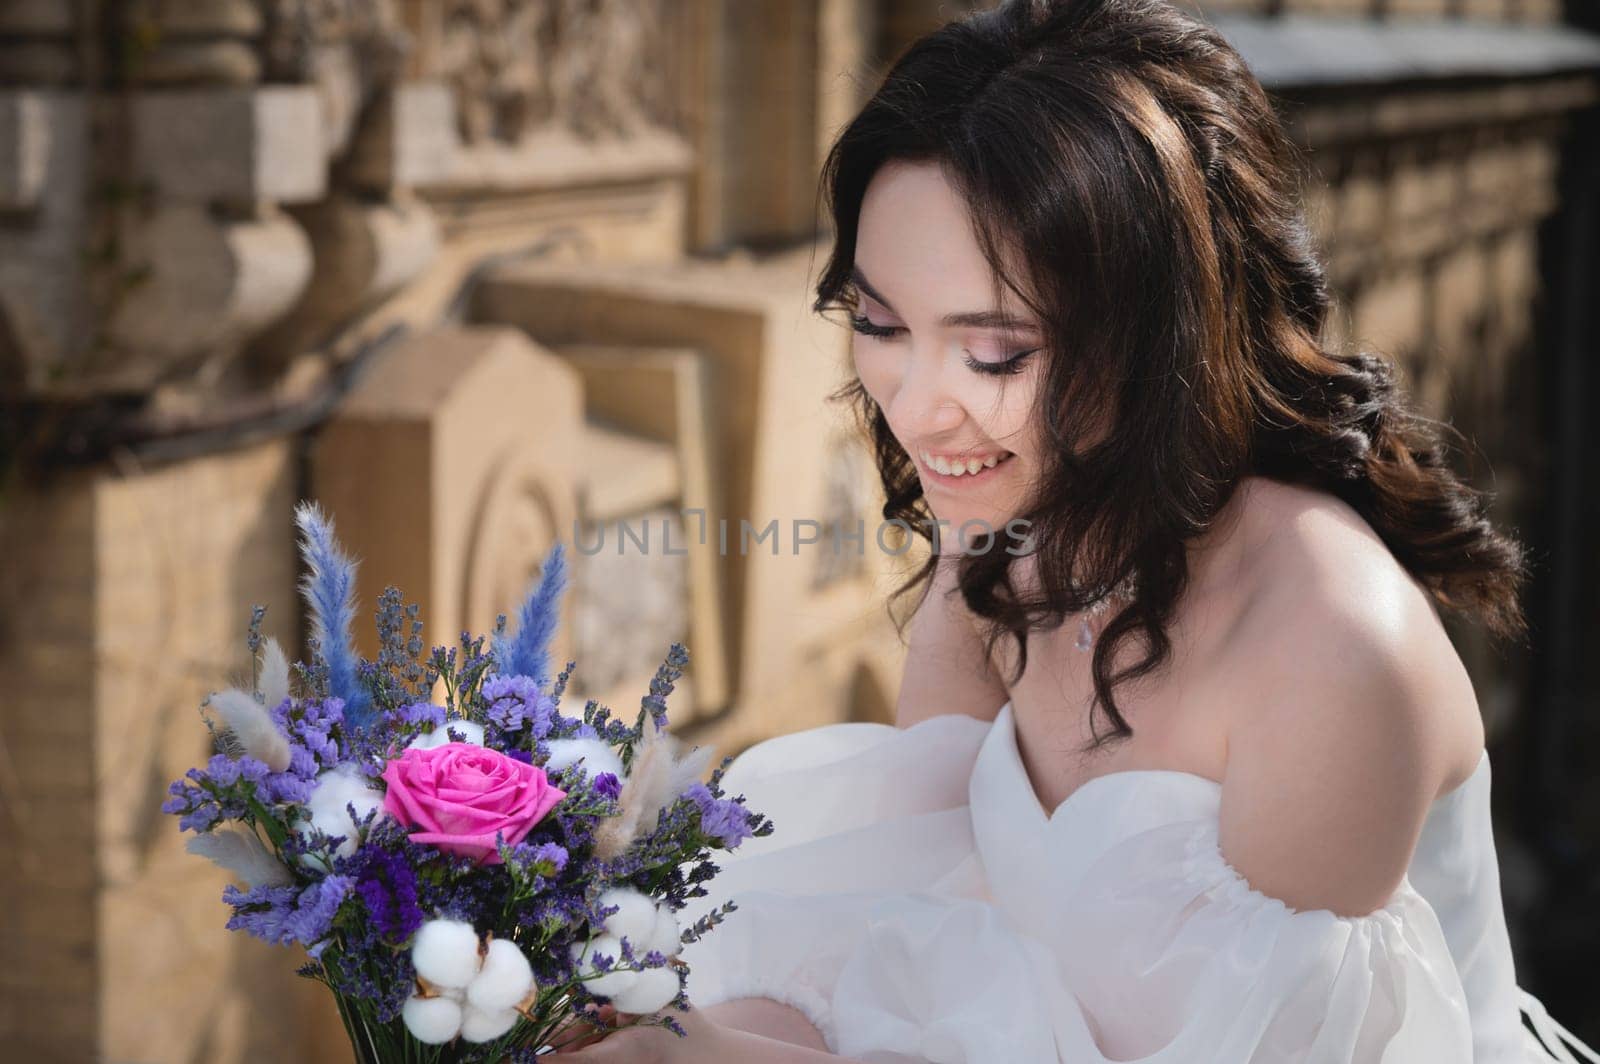 Stunning young bride with bouquet, portrait of smiling bride, happiness, wedding by yanik88